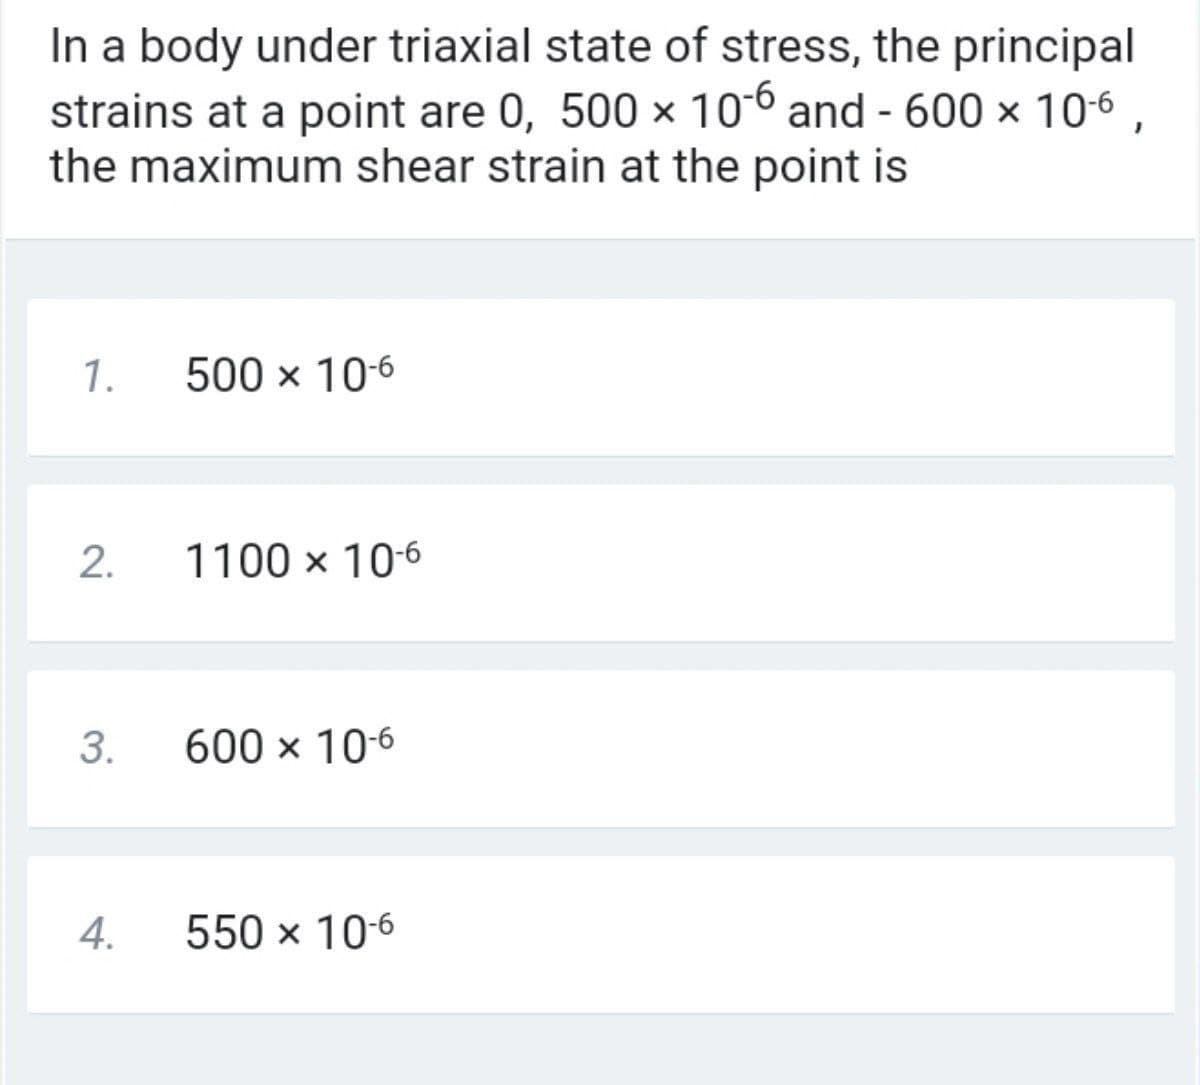 In a body under triaxial state of stress, the principal
strains at a point are 0, 500 × 106 and - 600 × 106
the maximum shear strain at the point is
1.
500 × 10-6
2.
1100 x 10-6
3.
600 х 10-6
4.
550 x 10-6
